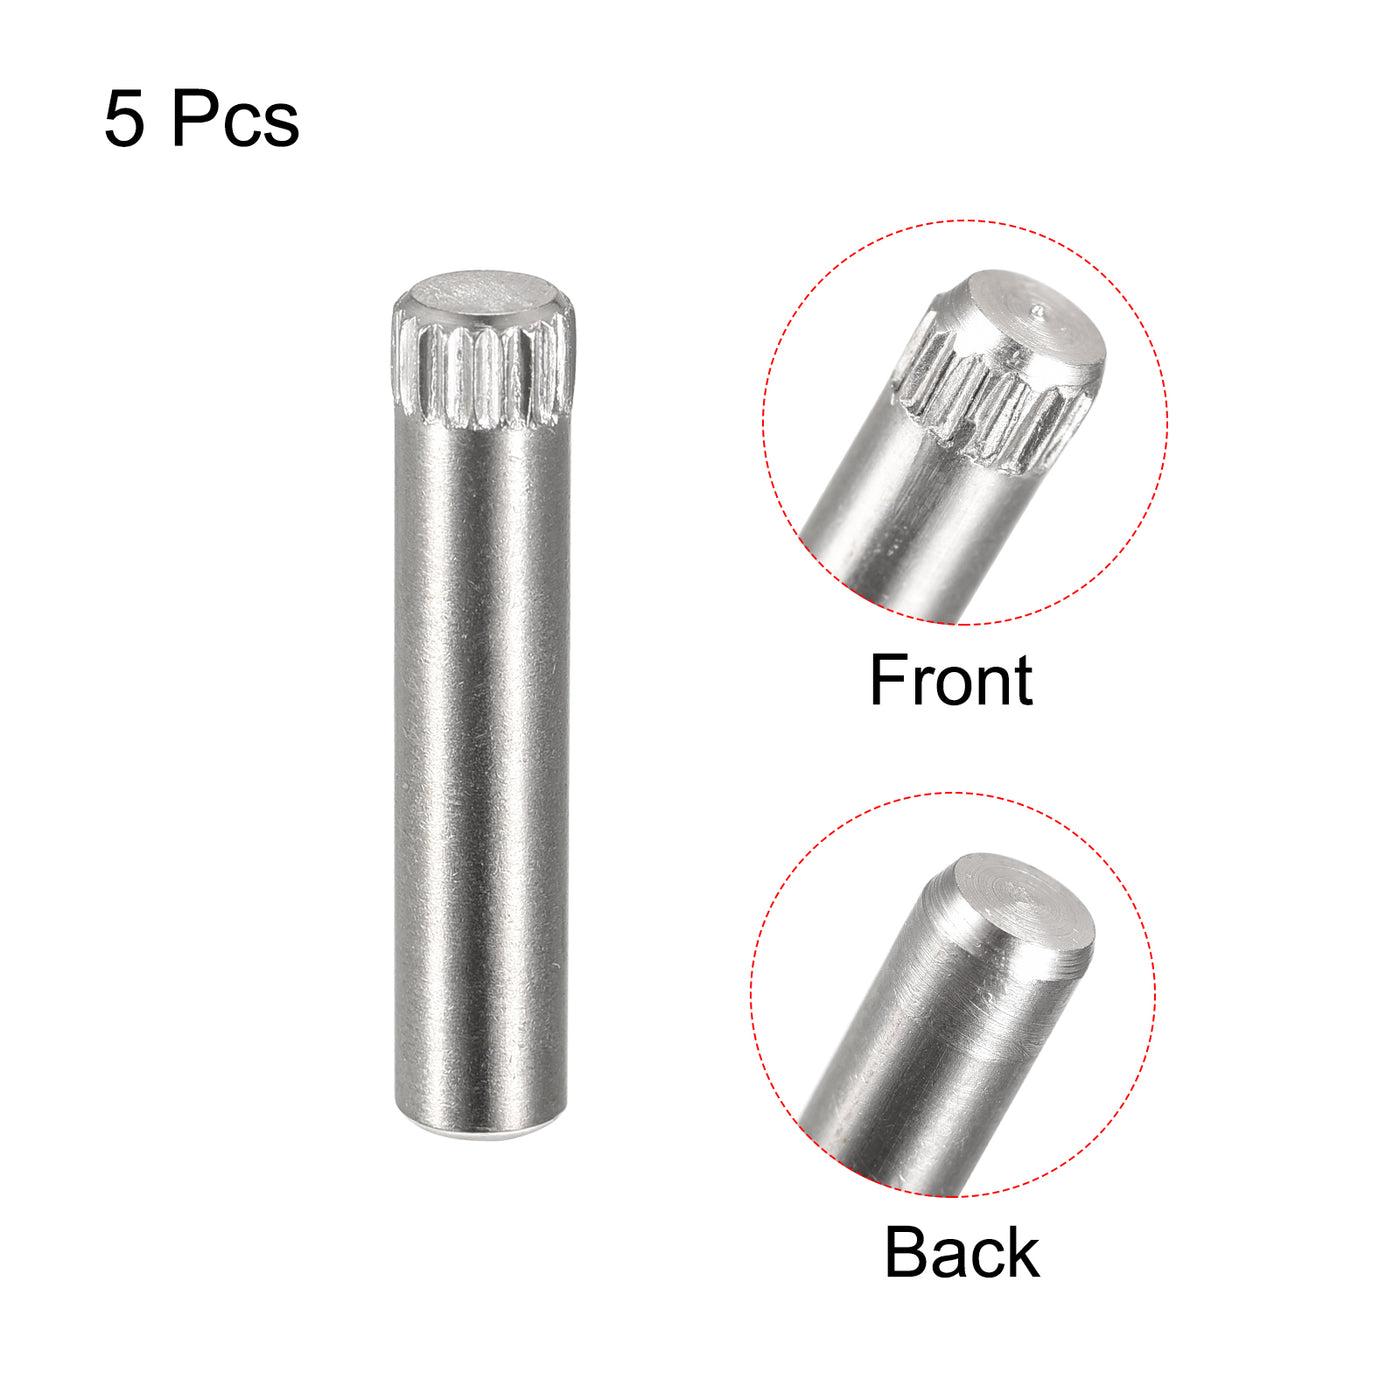 uxcell Uxcell 5x25mm 304 Stainless Steel Dowel Pins, 5Pcs Knurled Head Flat End Dowel Pin